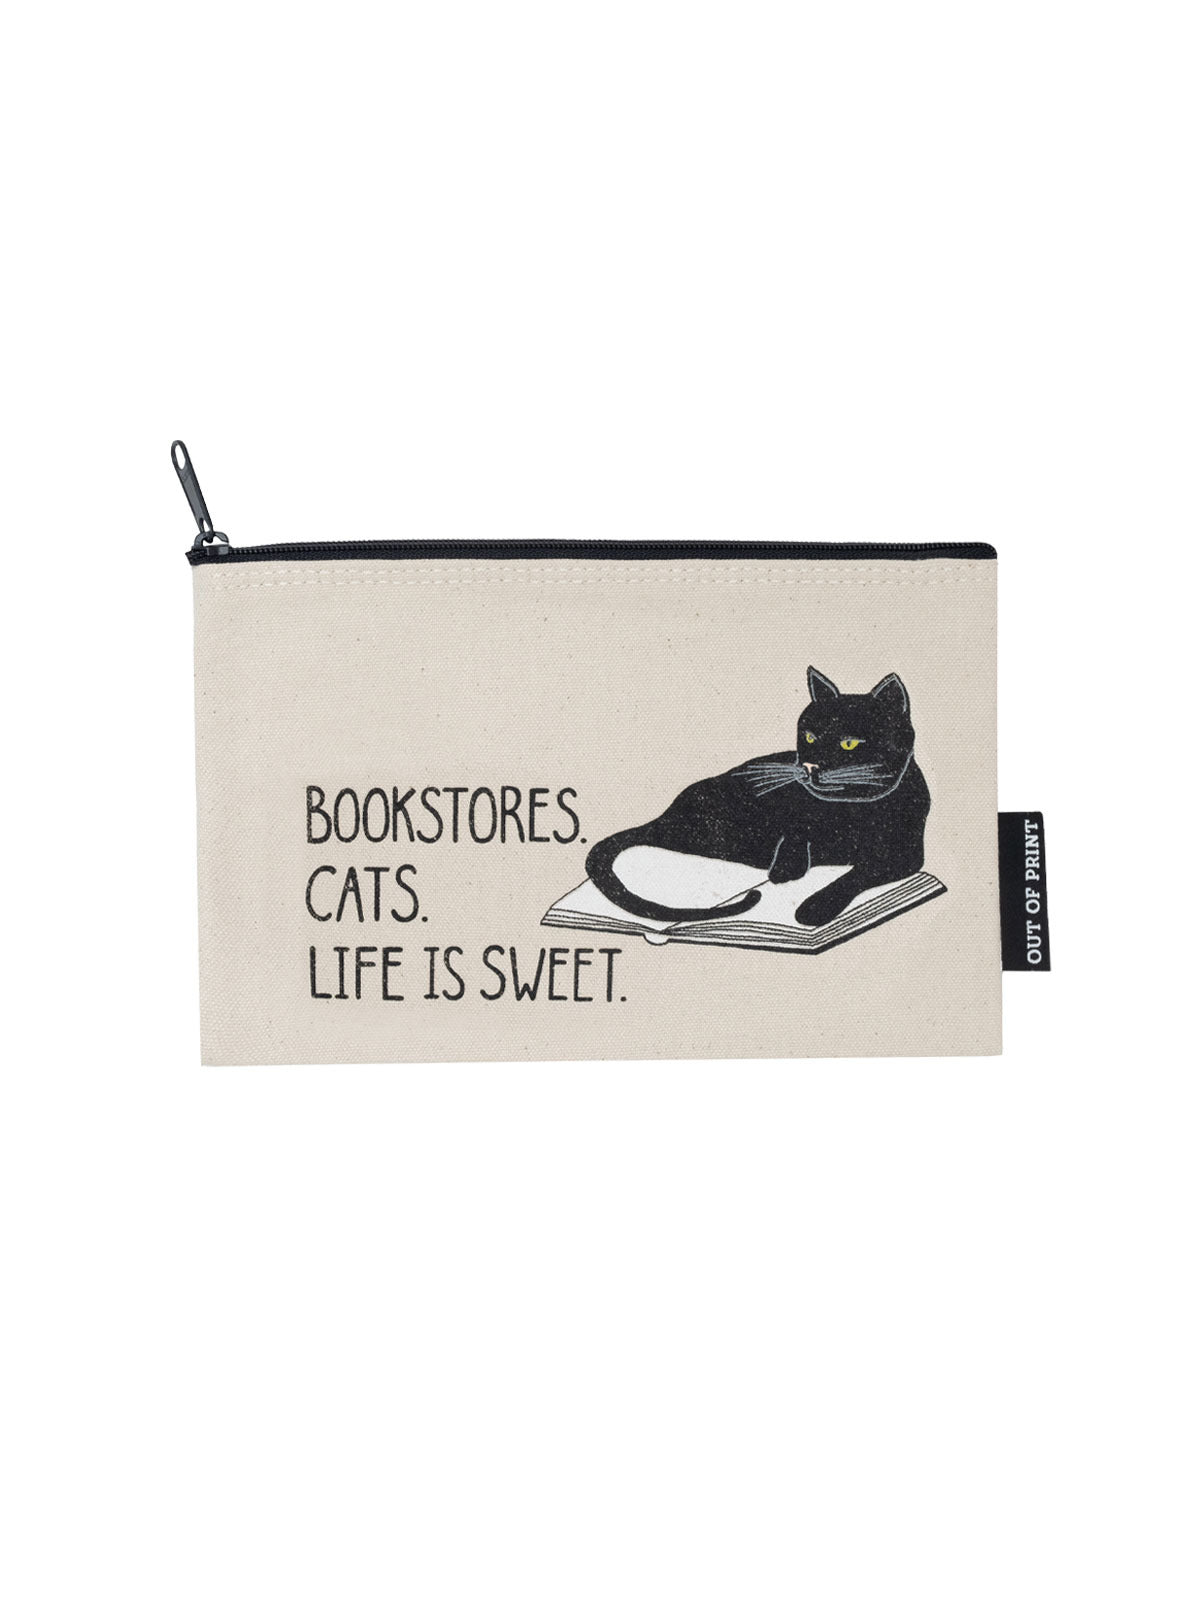 Canvas pouch depicting a cat laying on a book. The text on the pouch reads "Bookstores. Cats. Life is sweet."